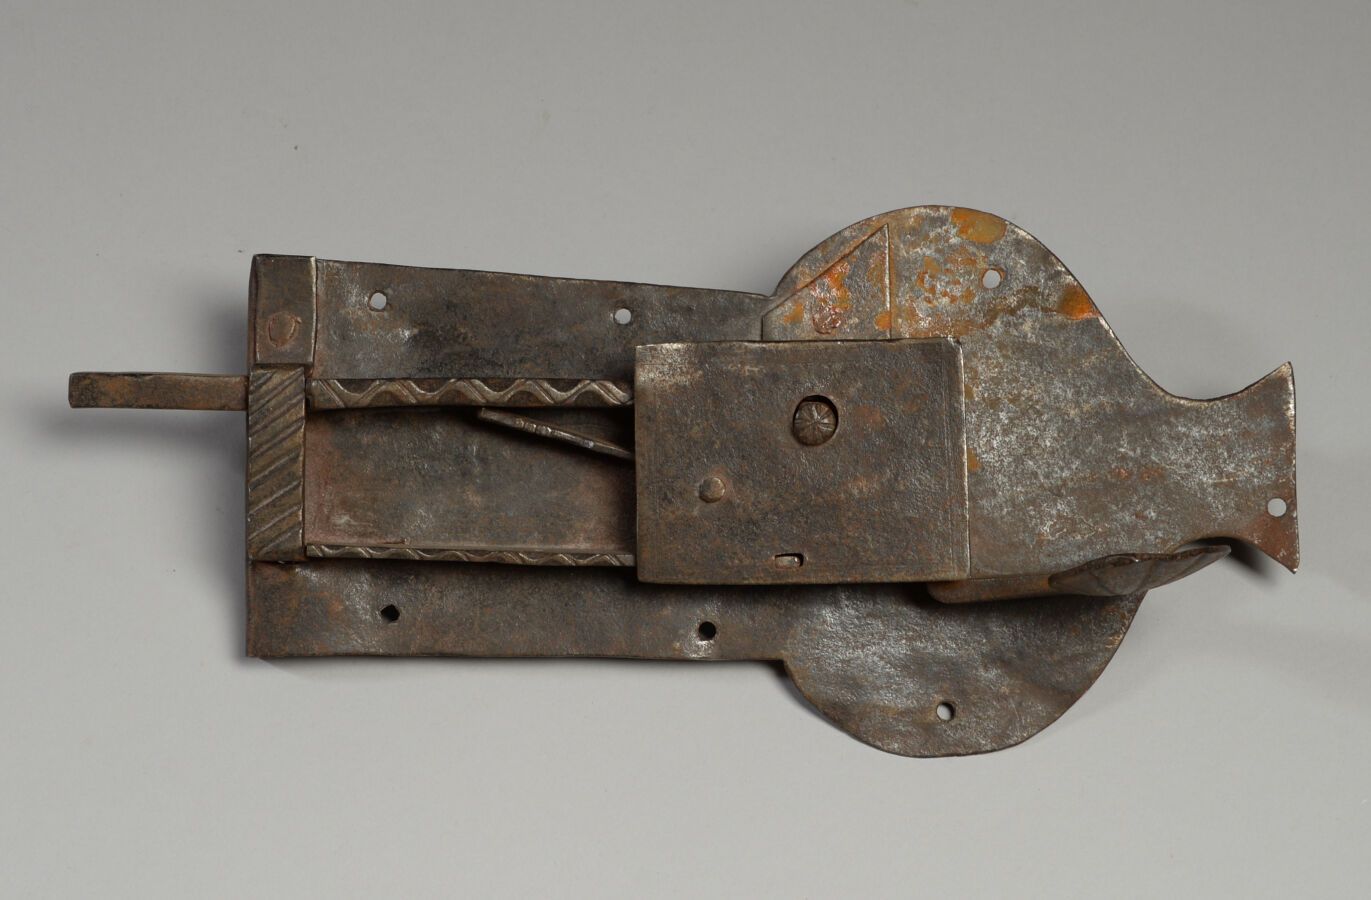 Null Lock with wrought iron latch.
18th century
Height 14 - Length 31 cm